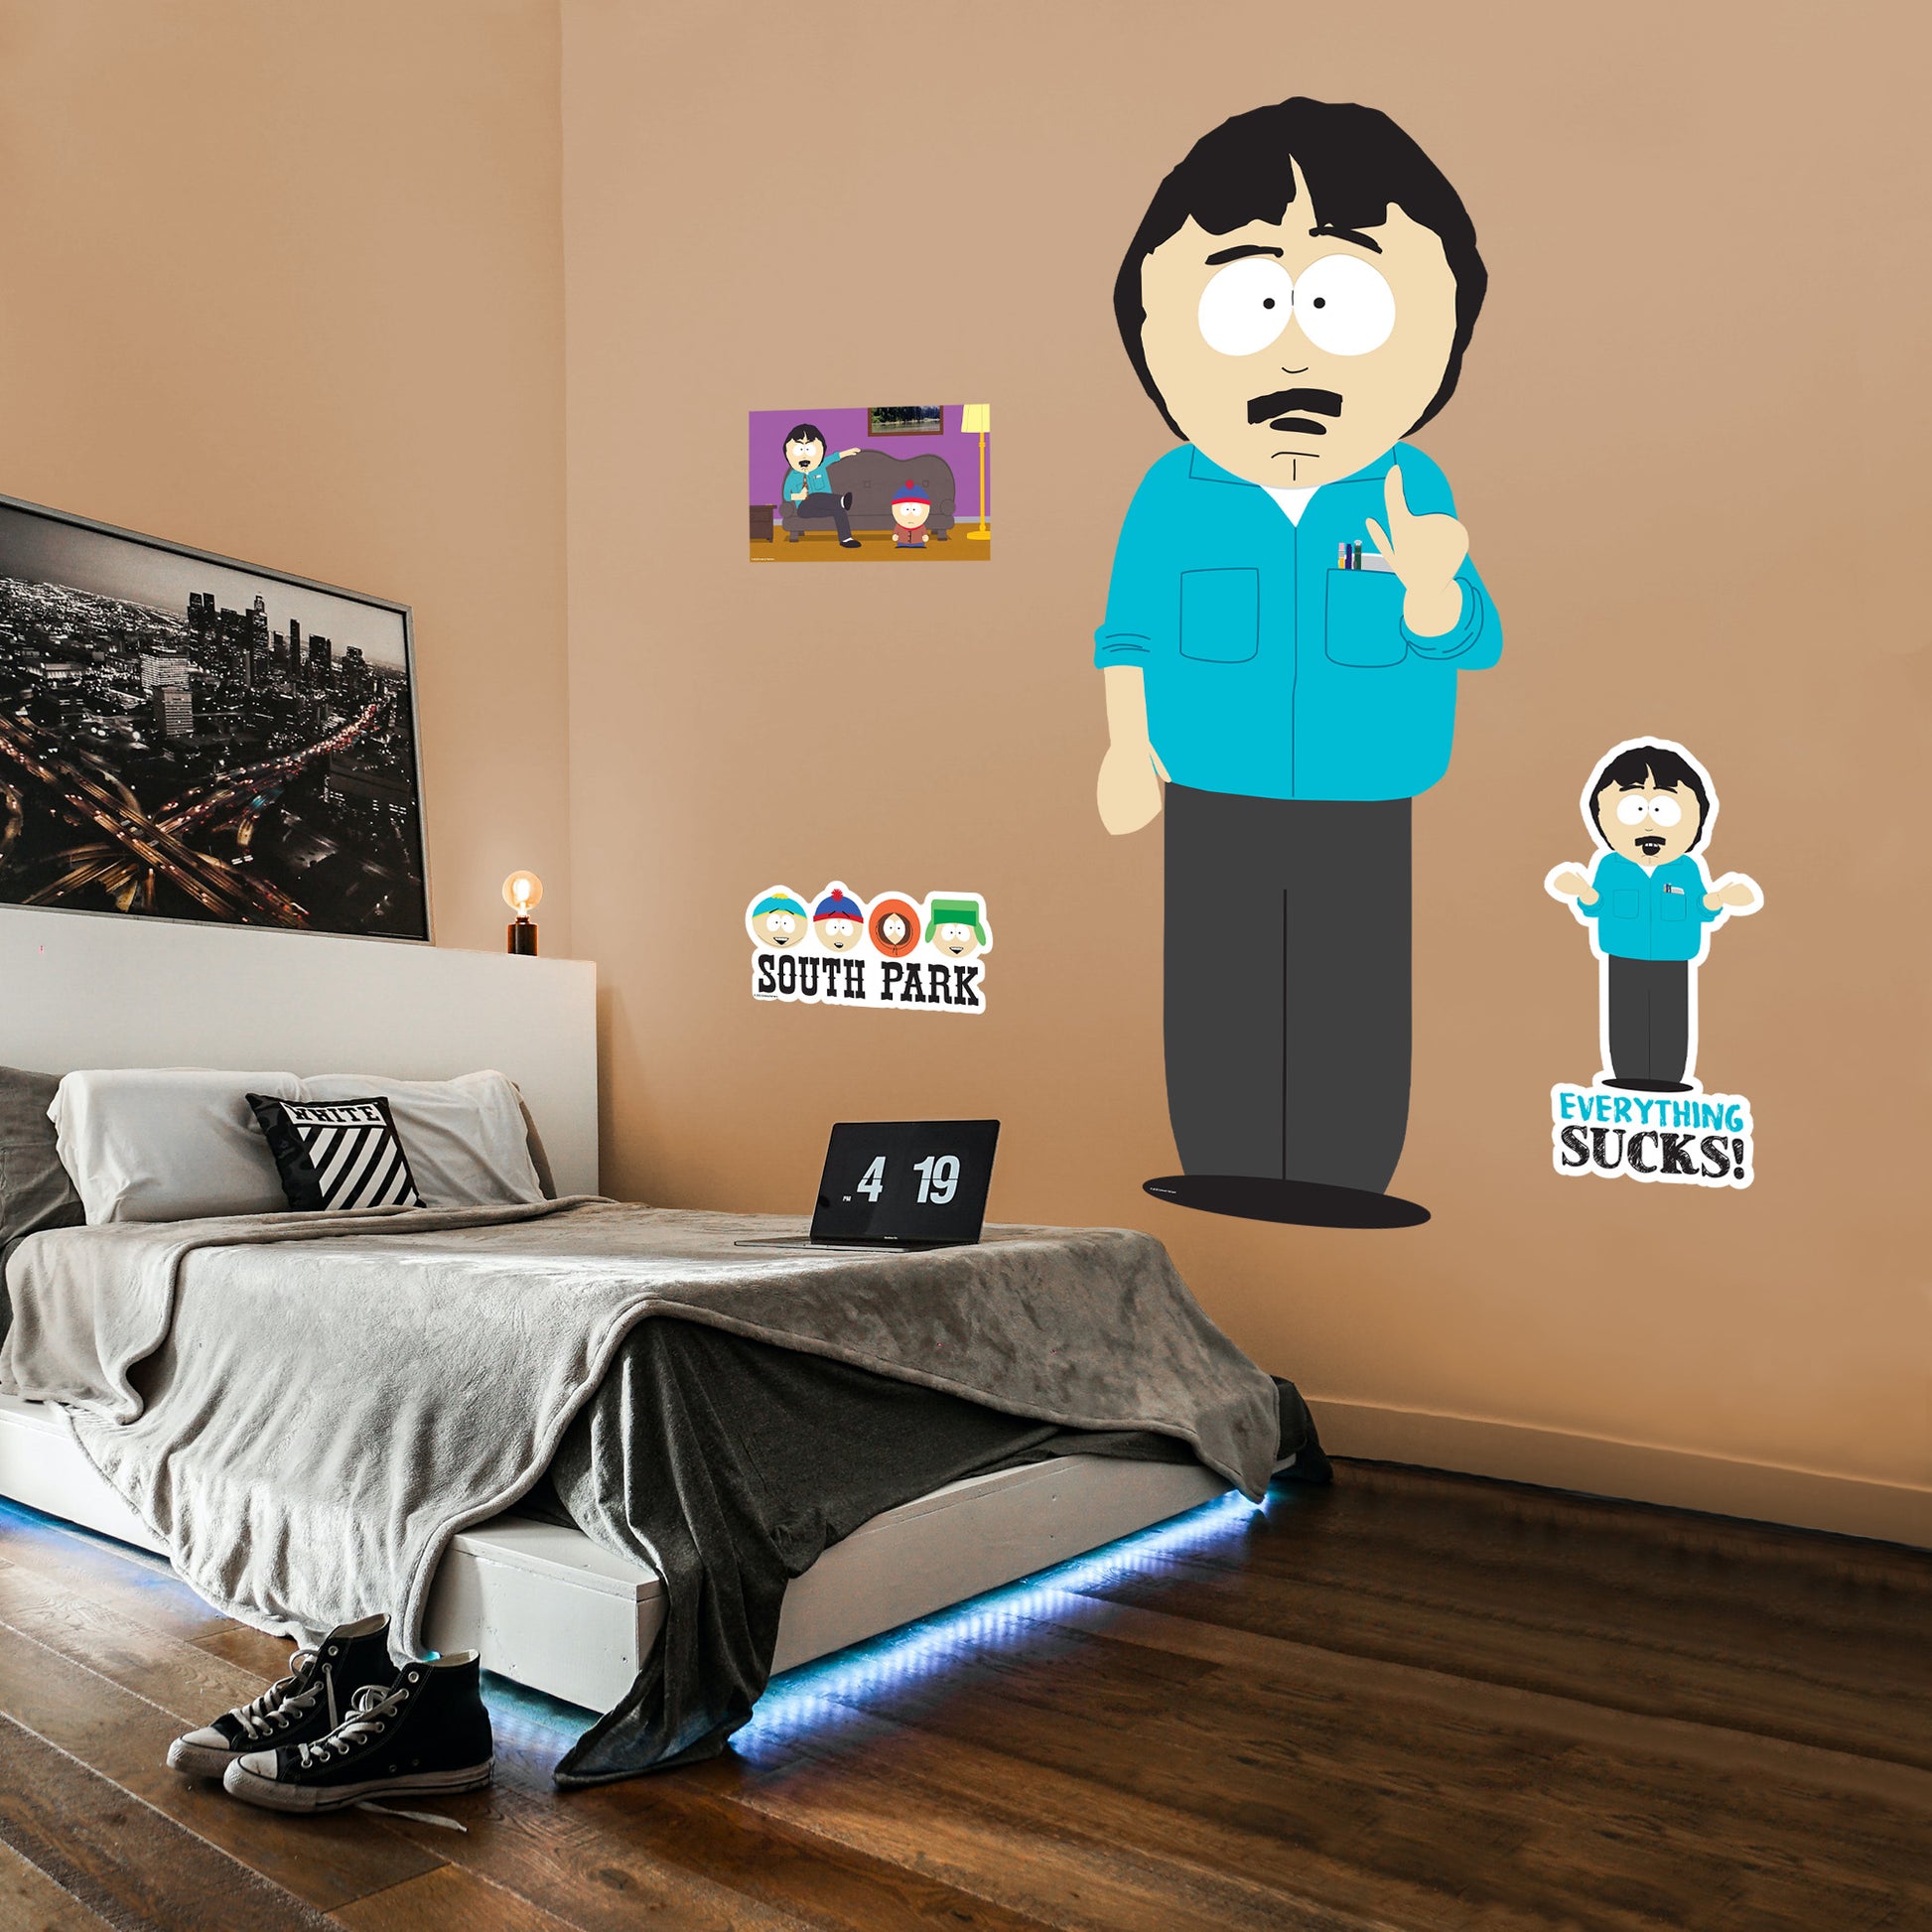 Life-Size Character +3 Decals  (51"W x 77"H) 